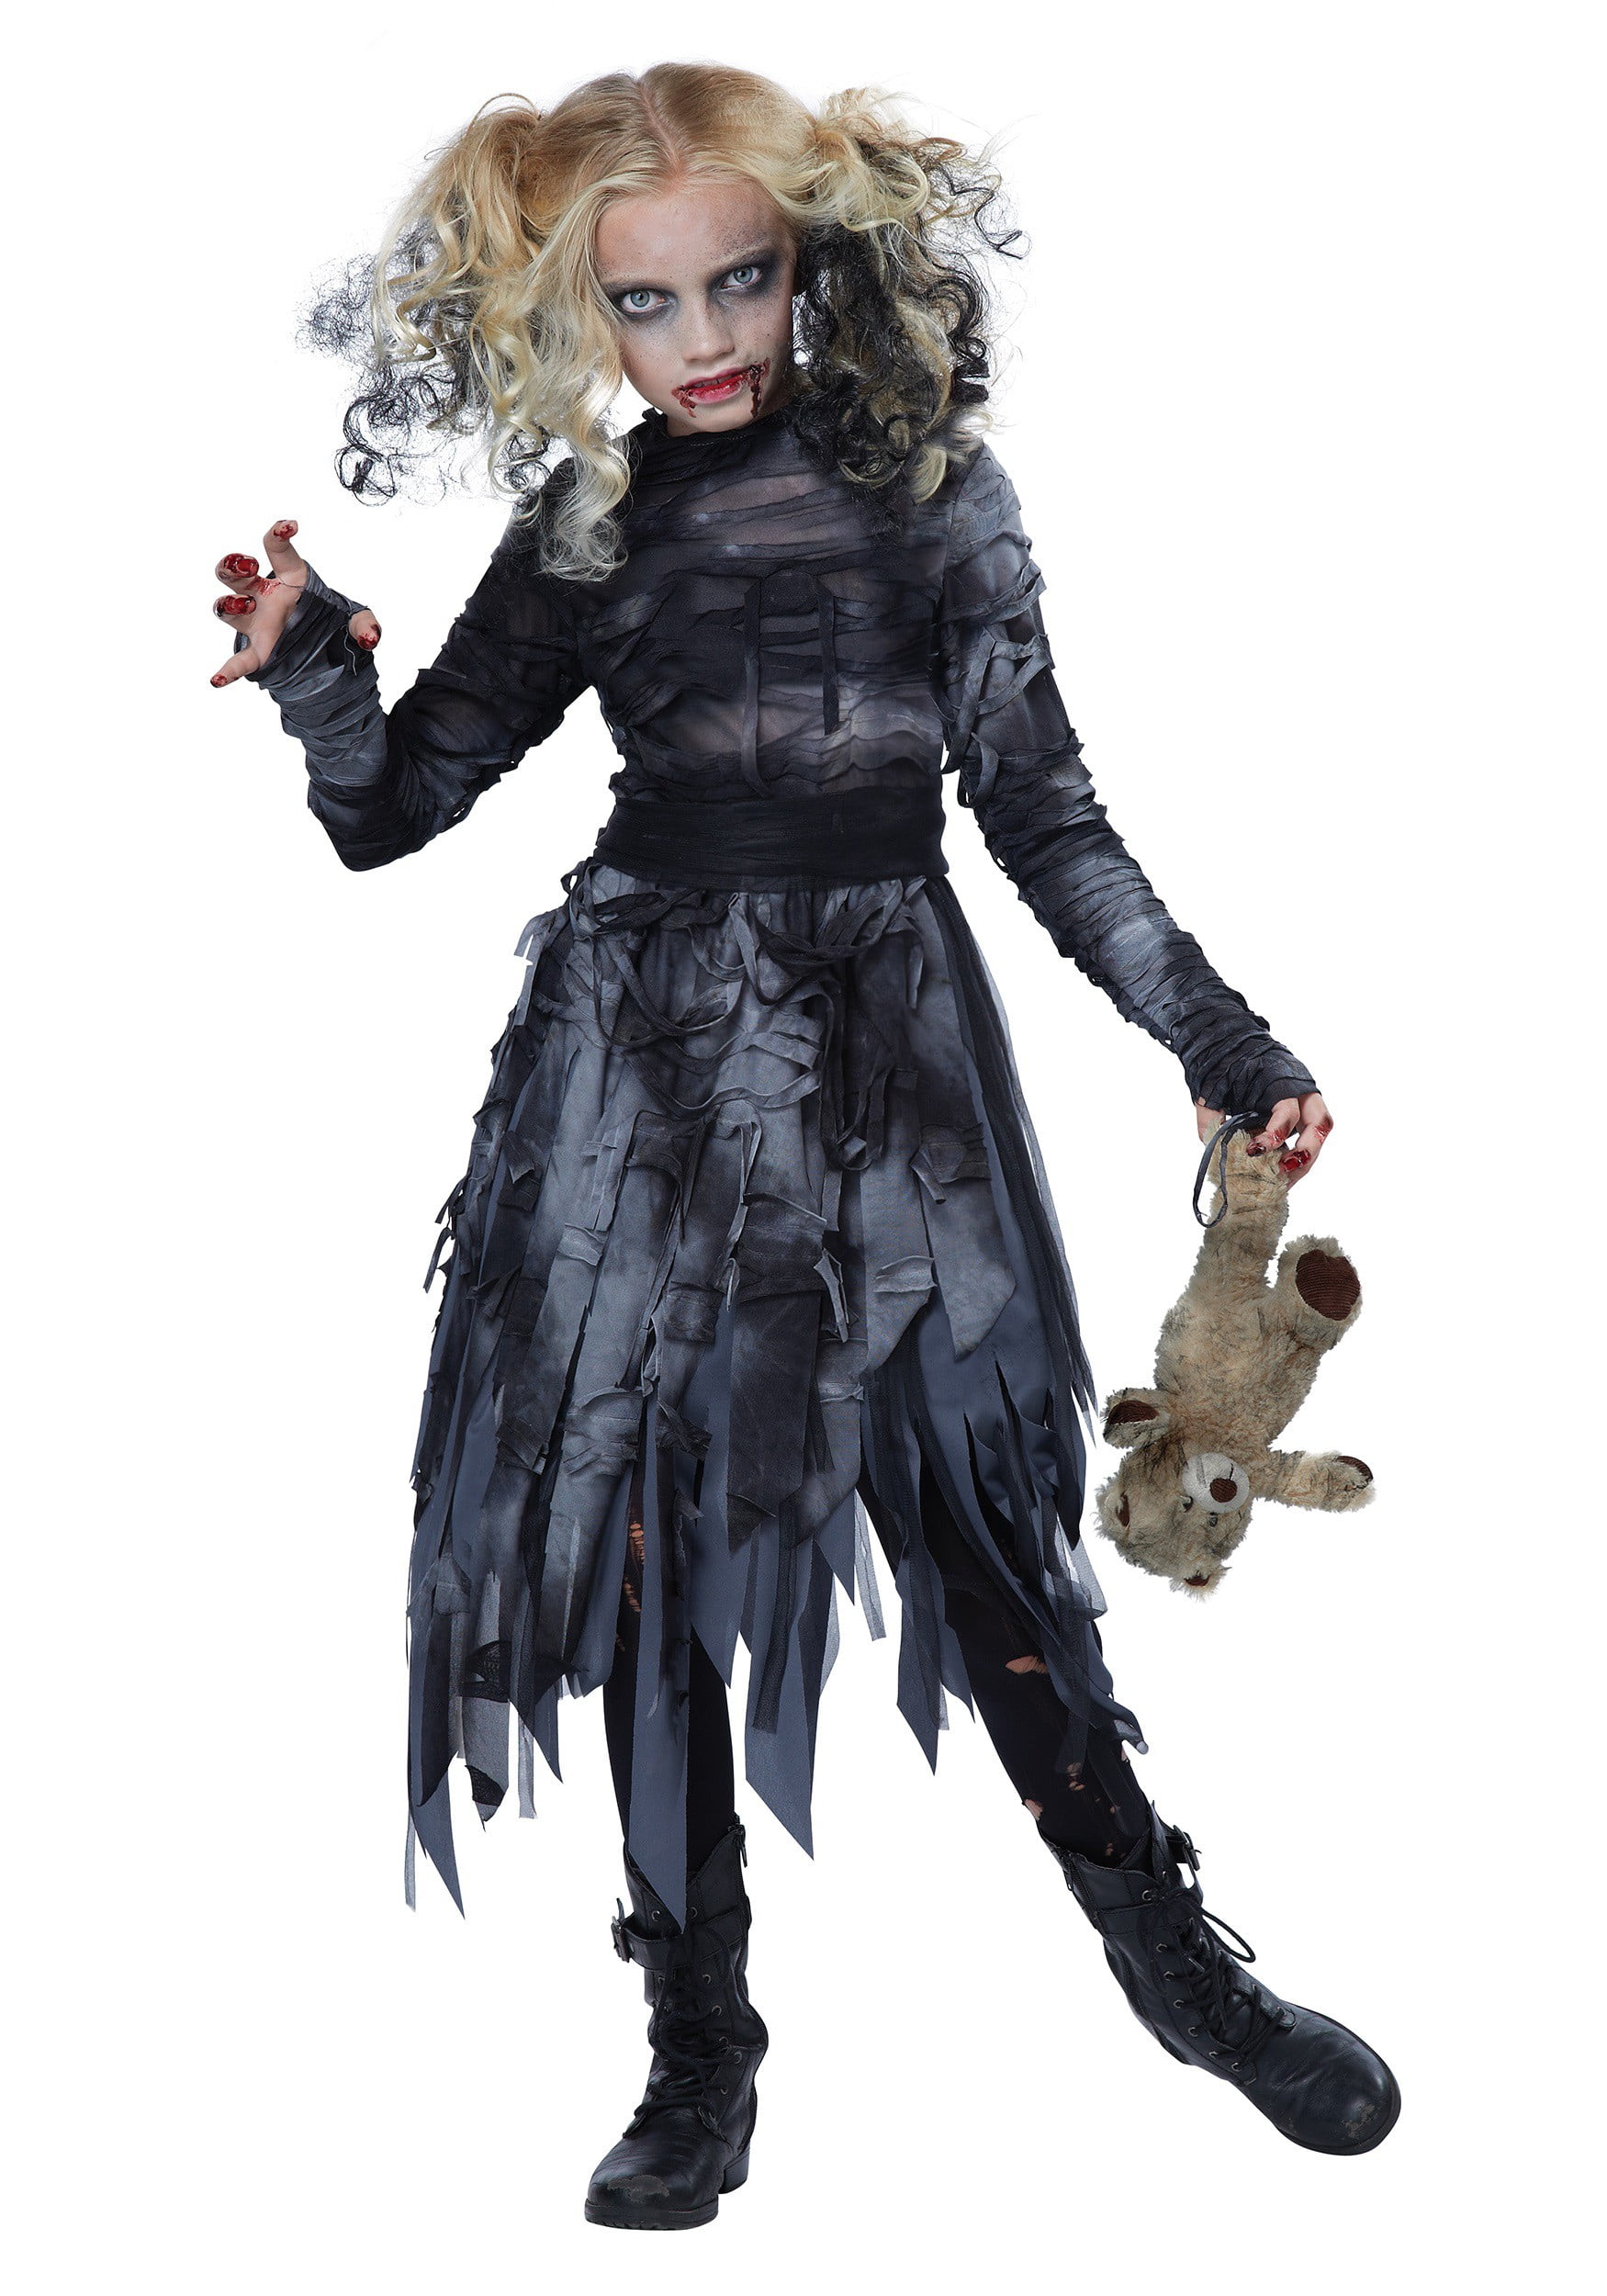 Zombie halloween costume for kids Scary Bloody Horror Cosplay Fancy Dress 